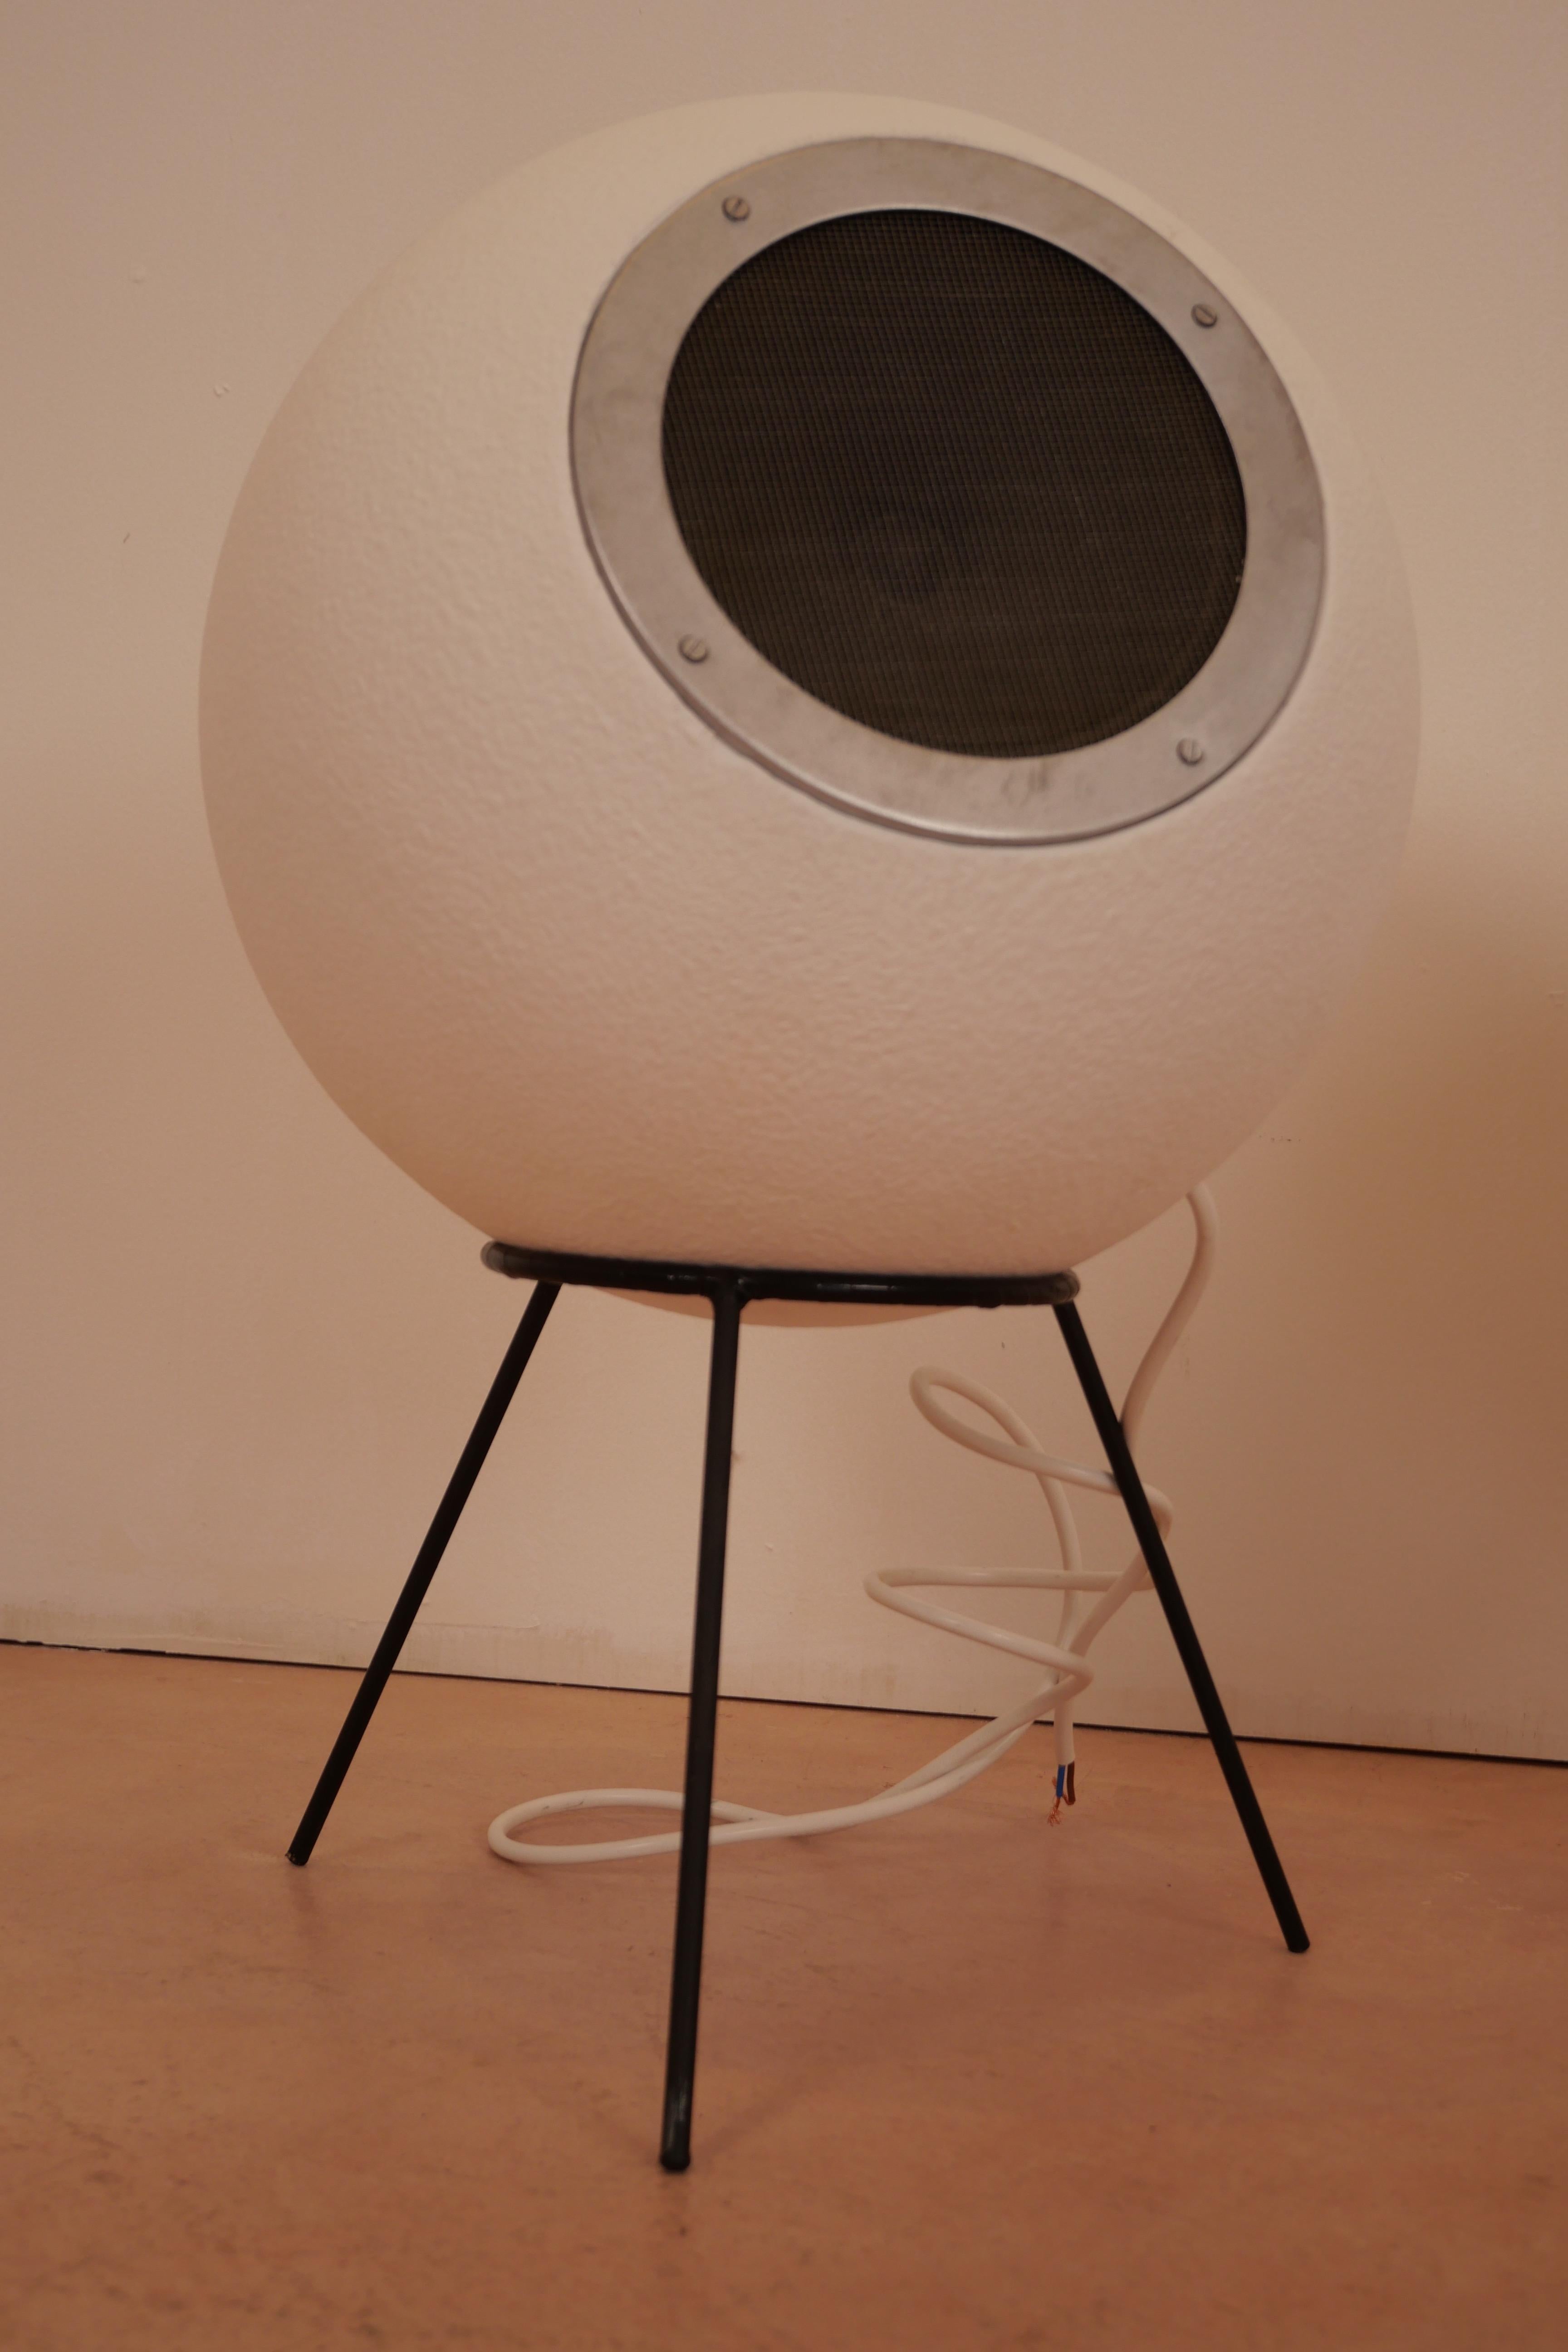 Original 1969 Elipson AS30 speaker in staff with its round, sensual and warm shape, was an Elipson bestseller. It was relatively compact for its time (30 cm in diameter, with a 16 cm Audax speaker) and was ideal for trendy buyers looking for a